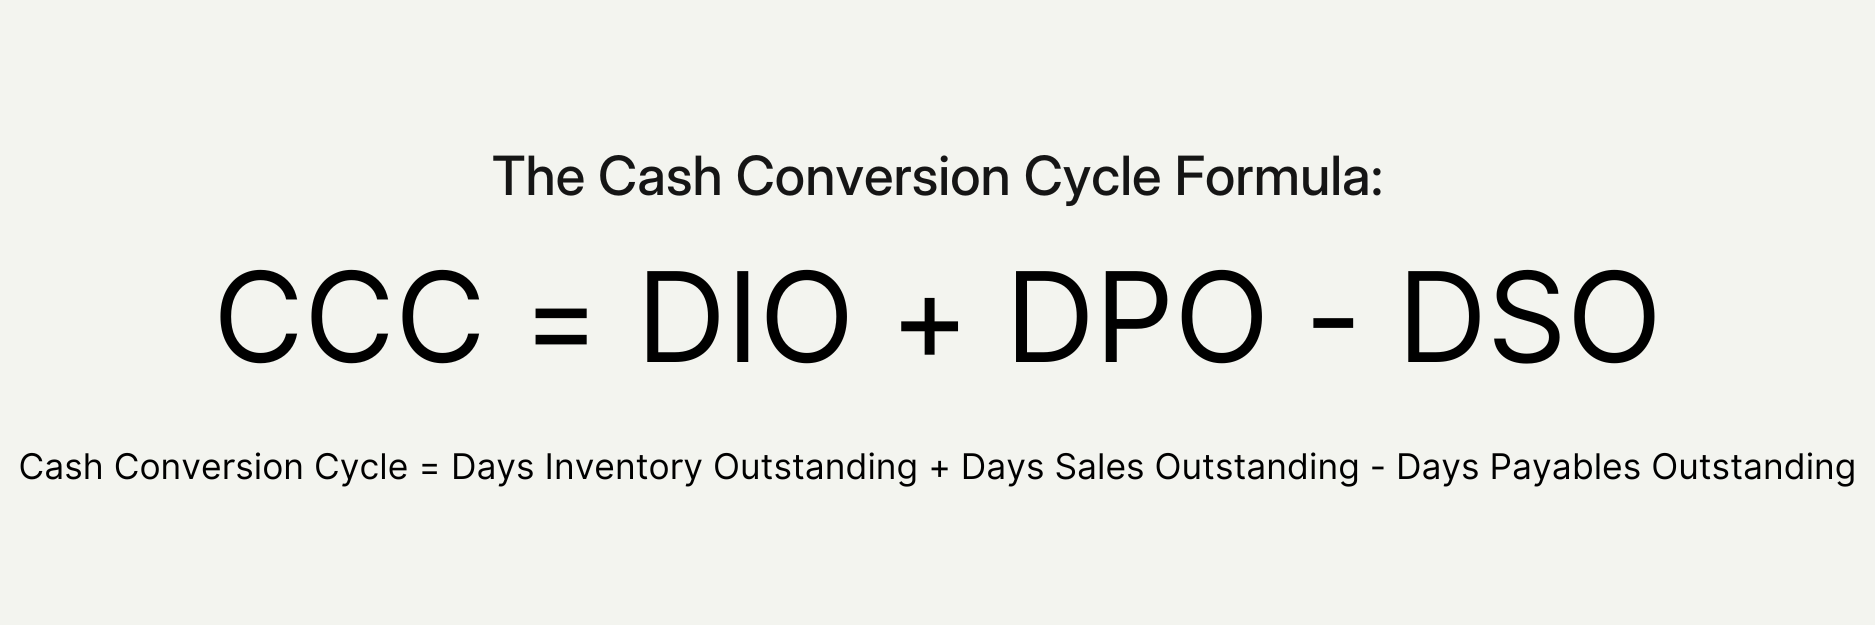 The formula for calculating cash conversion cycle (CCC). CCC = DIO + DPO -DSO